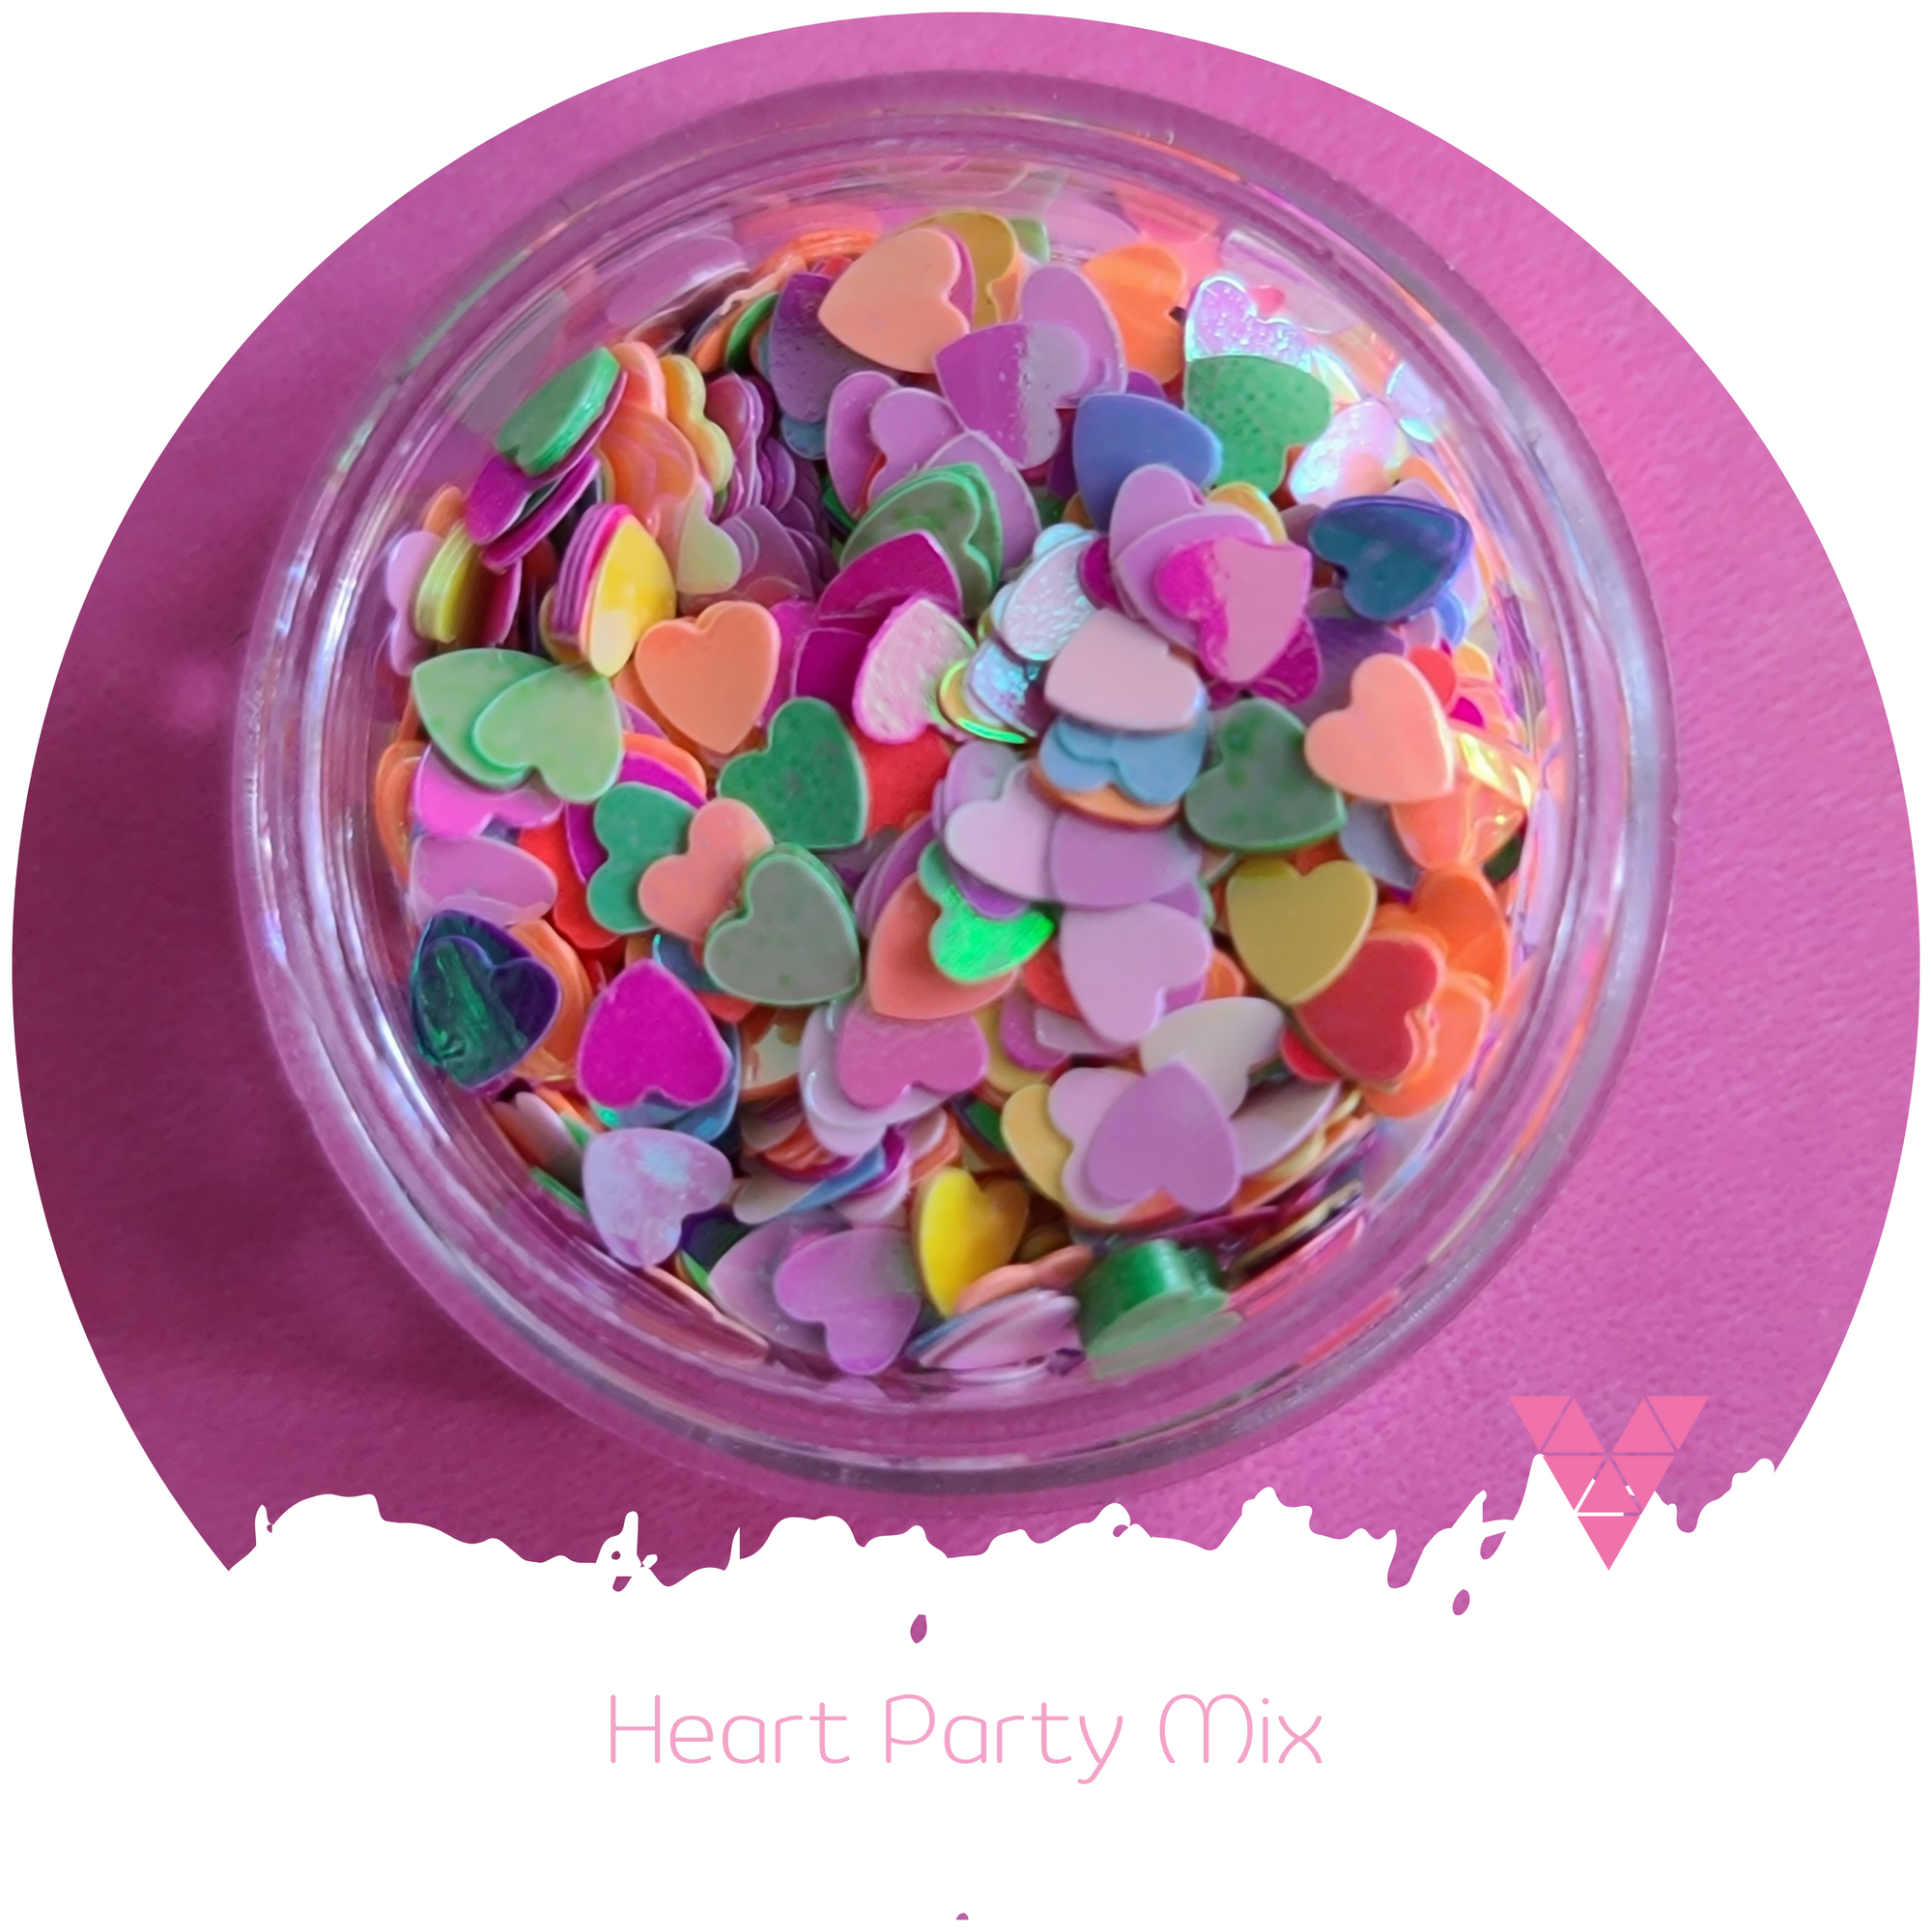 Heart Party Mix